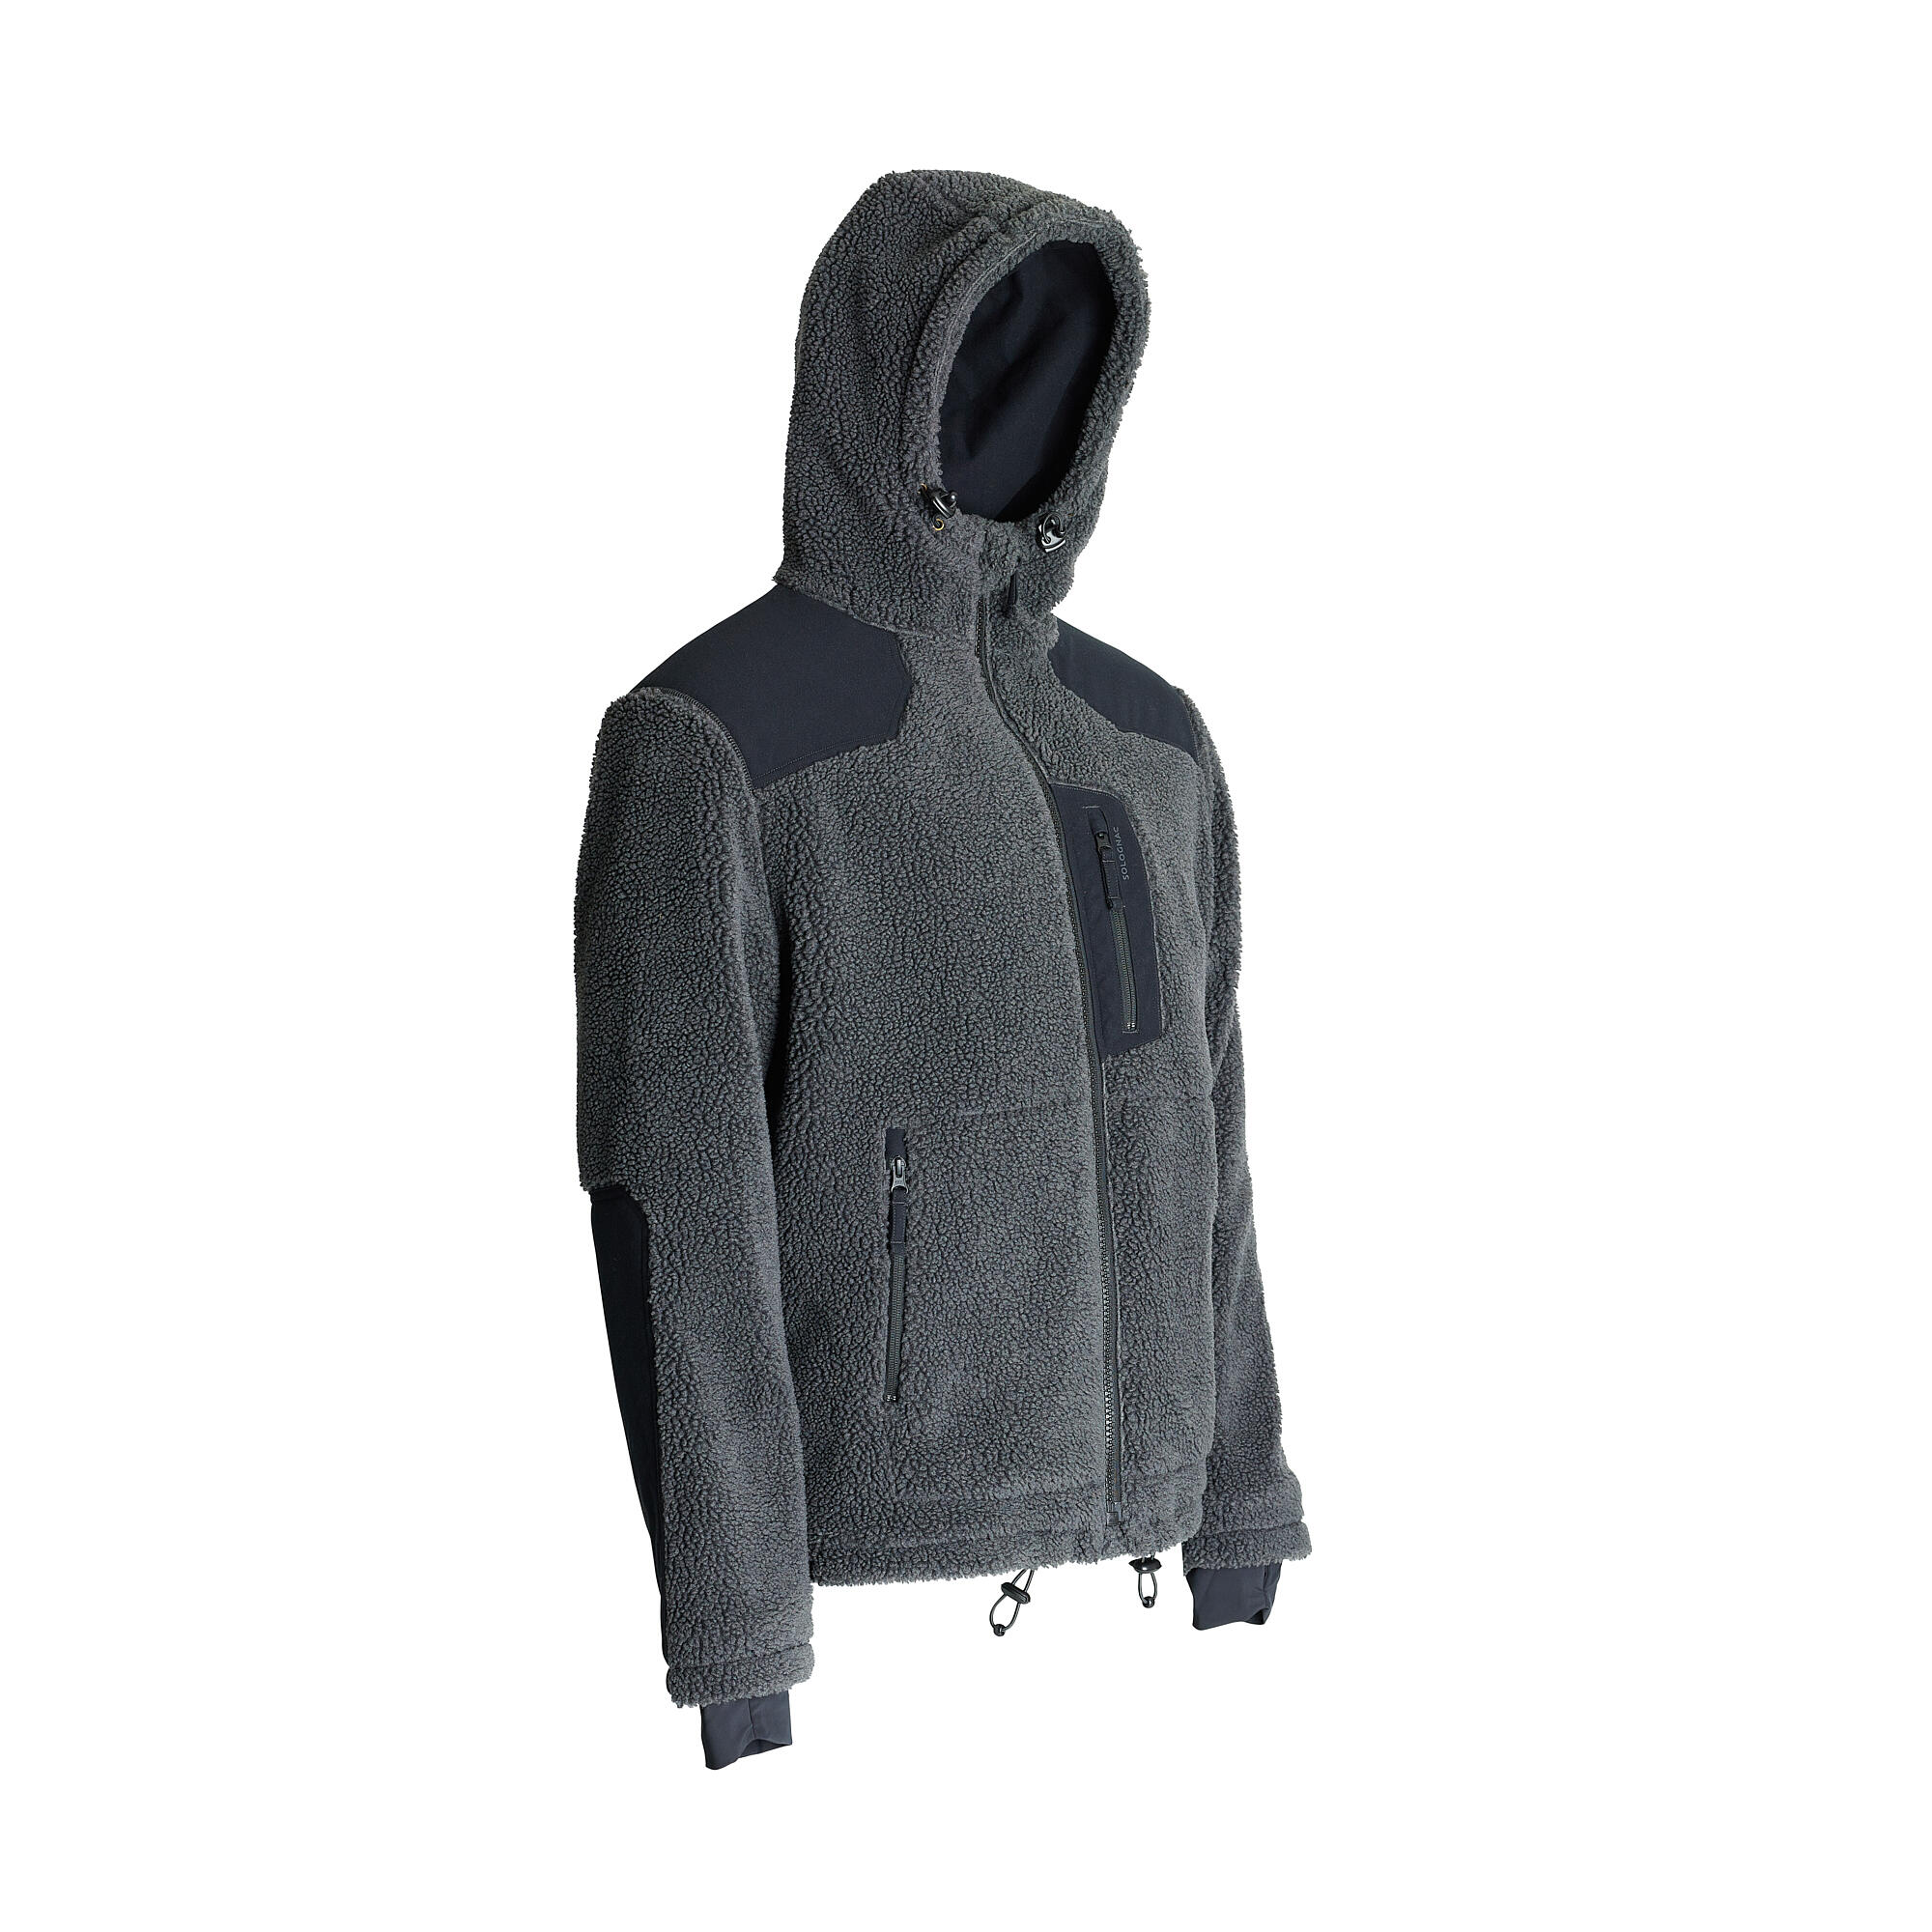 Bushcraft pullovers and fleeces